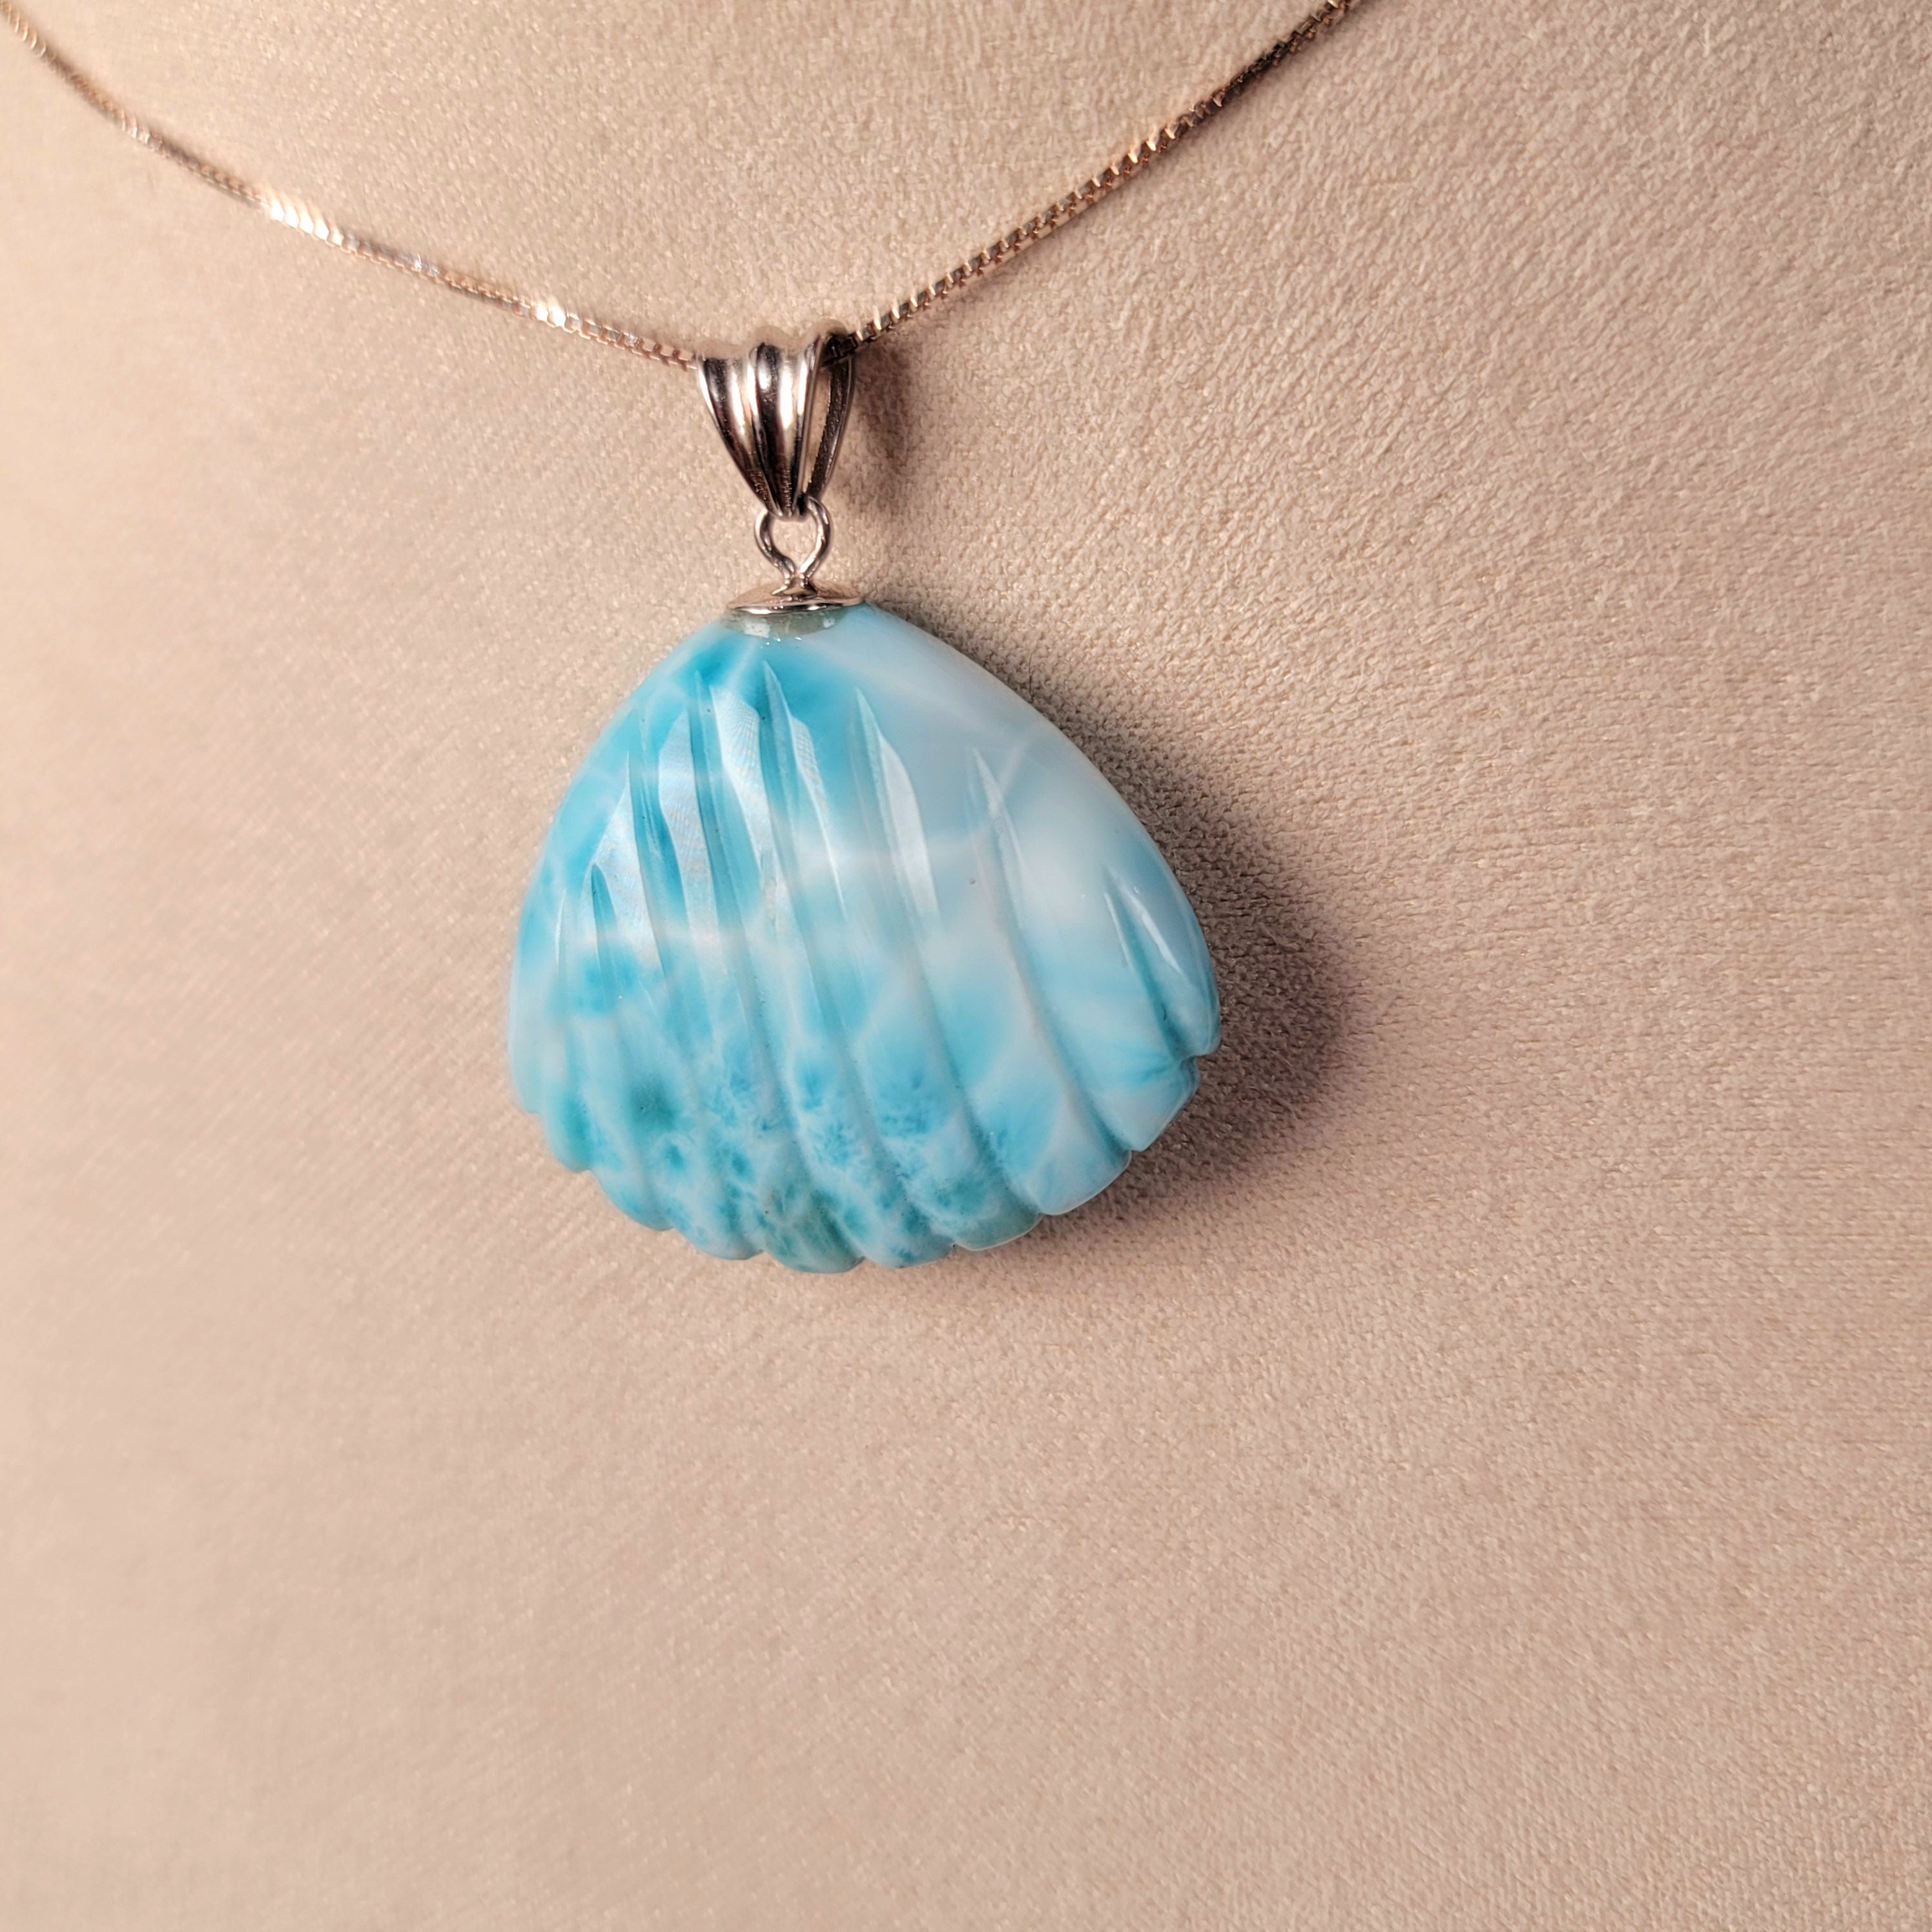 Larimar Sea Shell Carving Necklace .925. Silver for Connecting you to Mother Earth's Divine Treasures